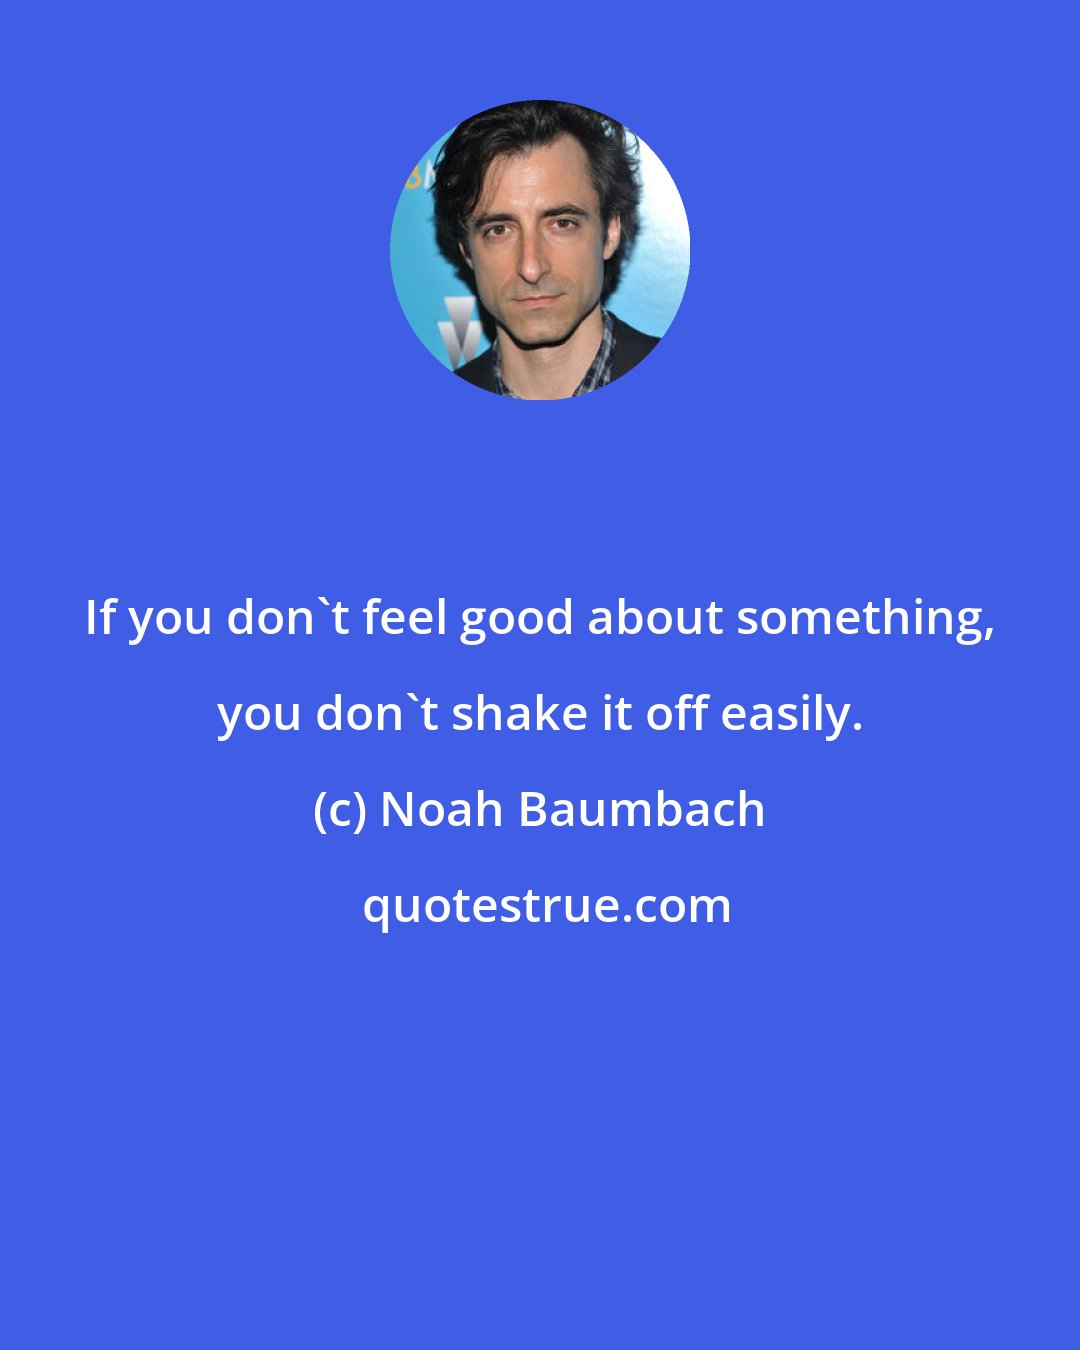 Noah Baumbach: If you don't feel good about something, you don't shake it off easily.